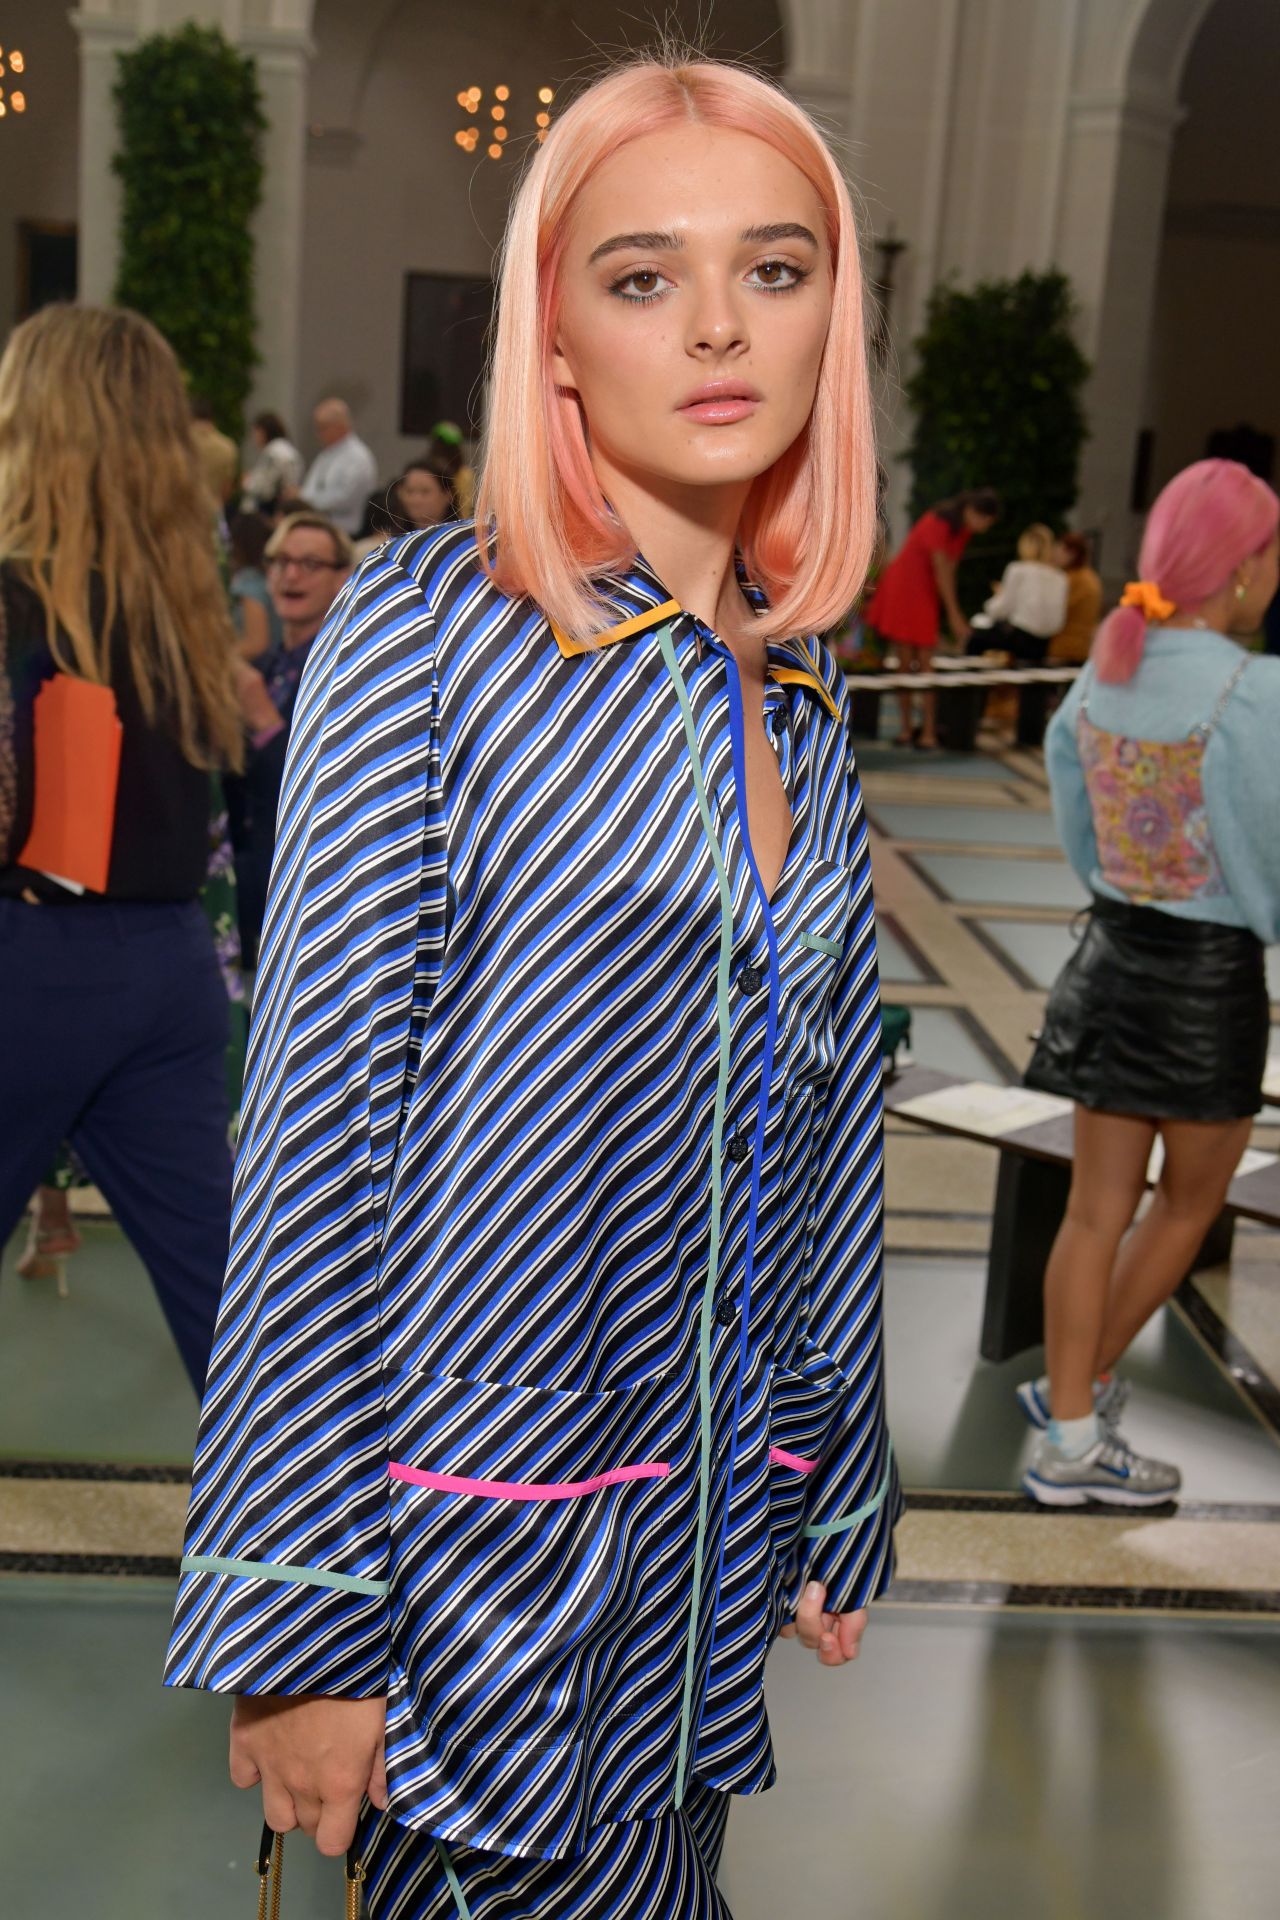 charlotte-lawrence-tory-burch-fashion-show-in-nyc-09-08-2019-5.jpg